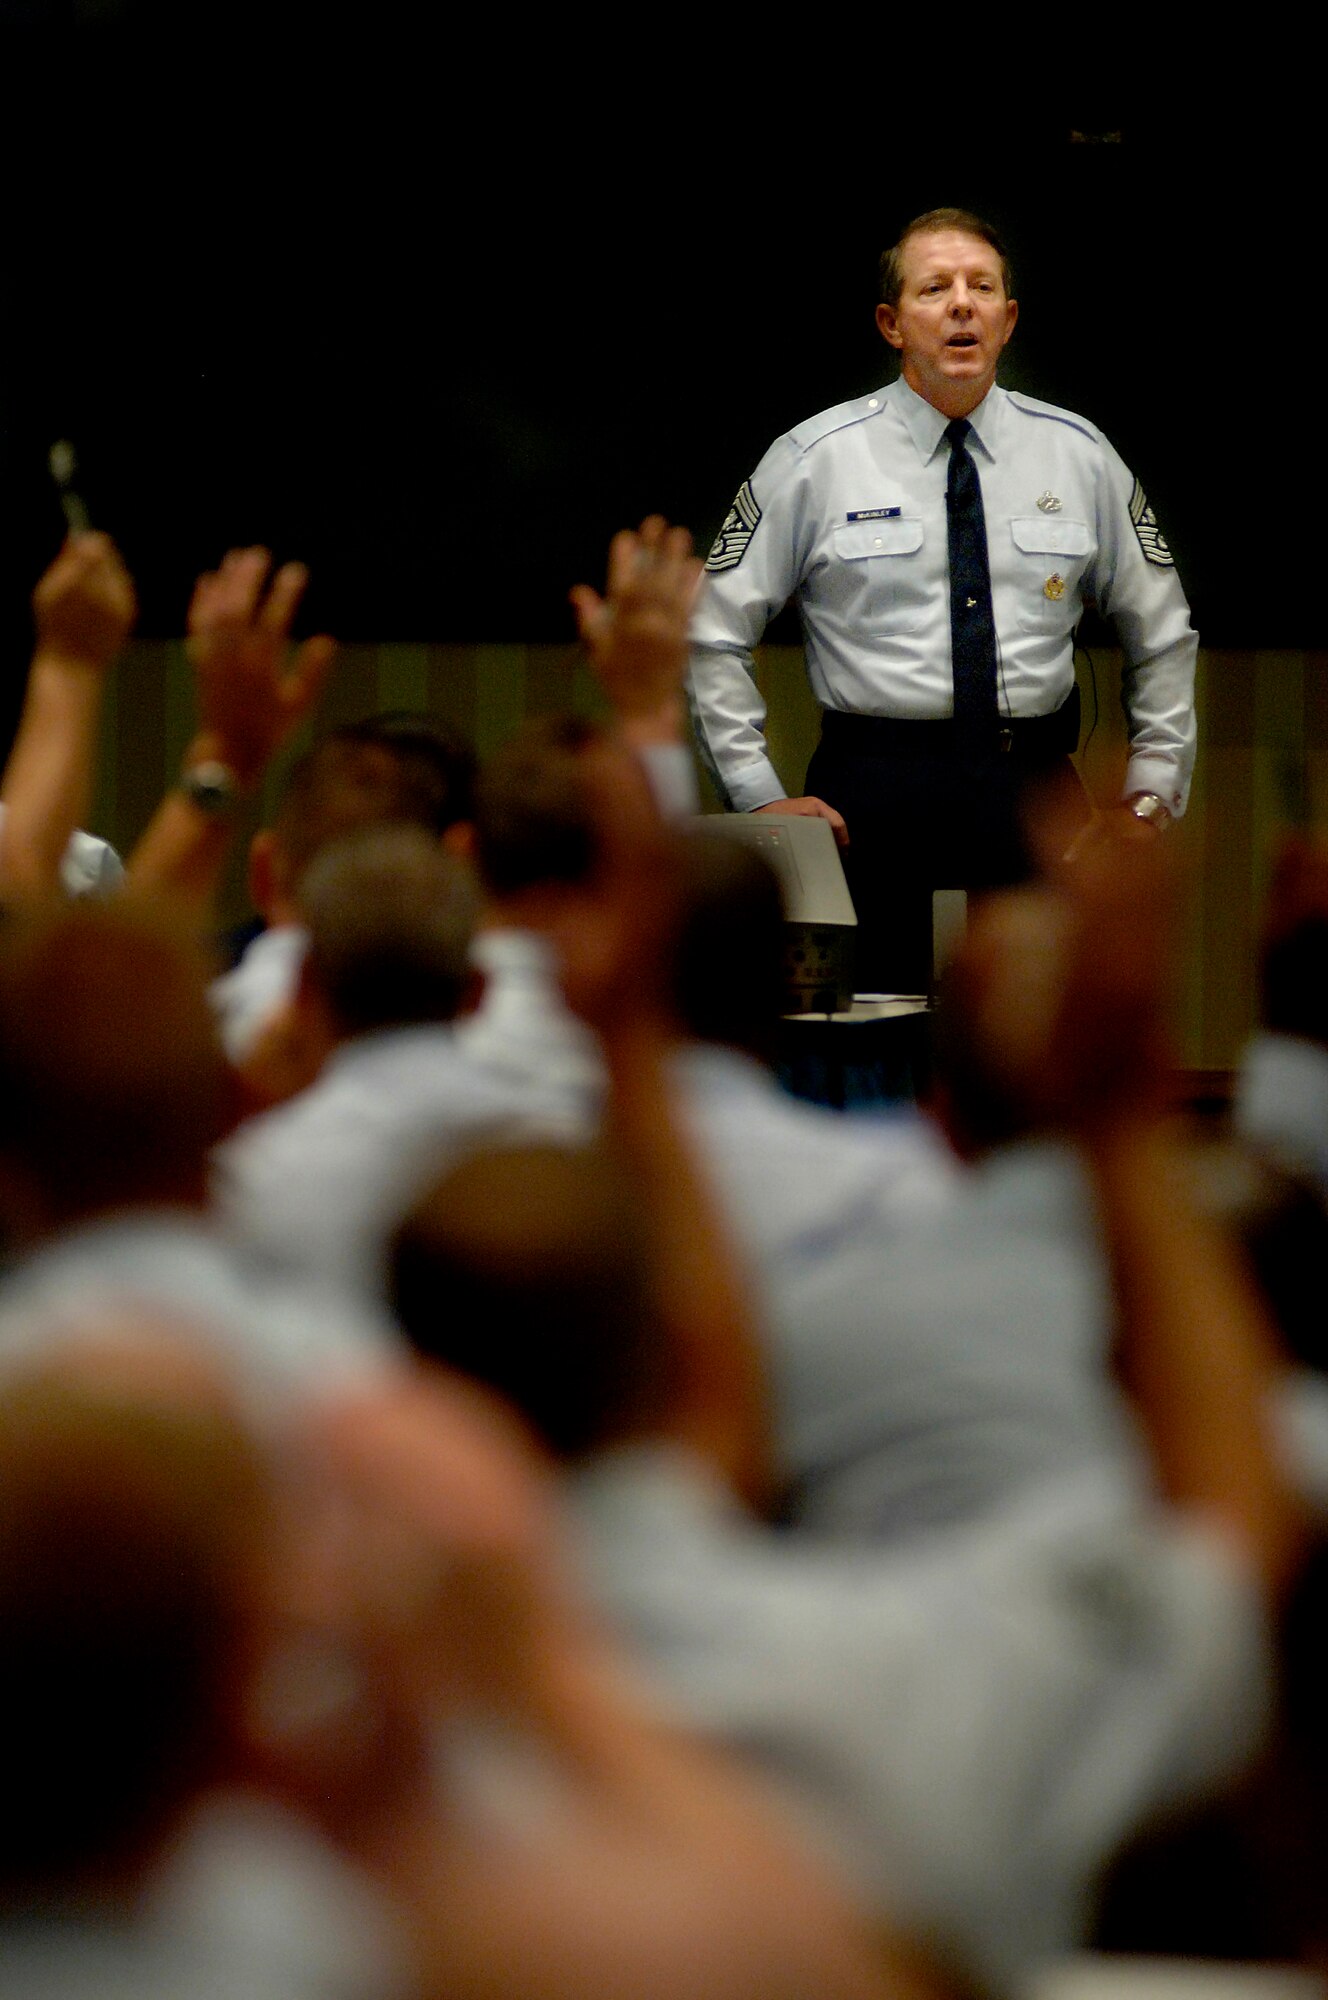 Chief Master Sgt. of the Air Force Rodney J. McKinley briefs Airmen at the 2007 Air Force Sergeants Association Conference held in Orlando, Fla., Aug. 21. (U.S. Air Force photo/ Airman 1st Class Nicholas Pilch)